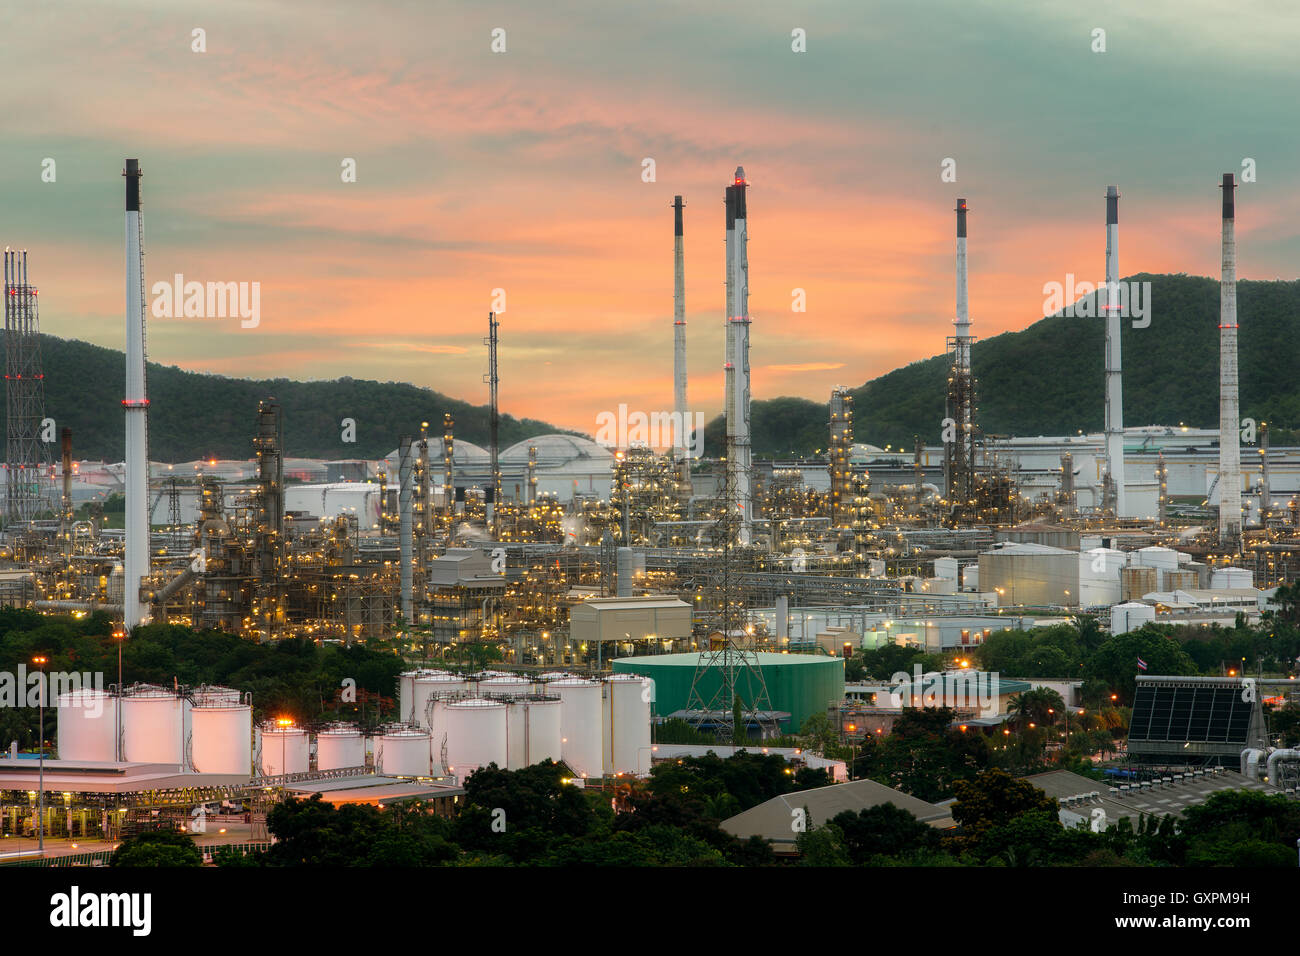 Landscape of oil refinery industry with oil storage tank Stock Photo